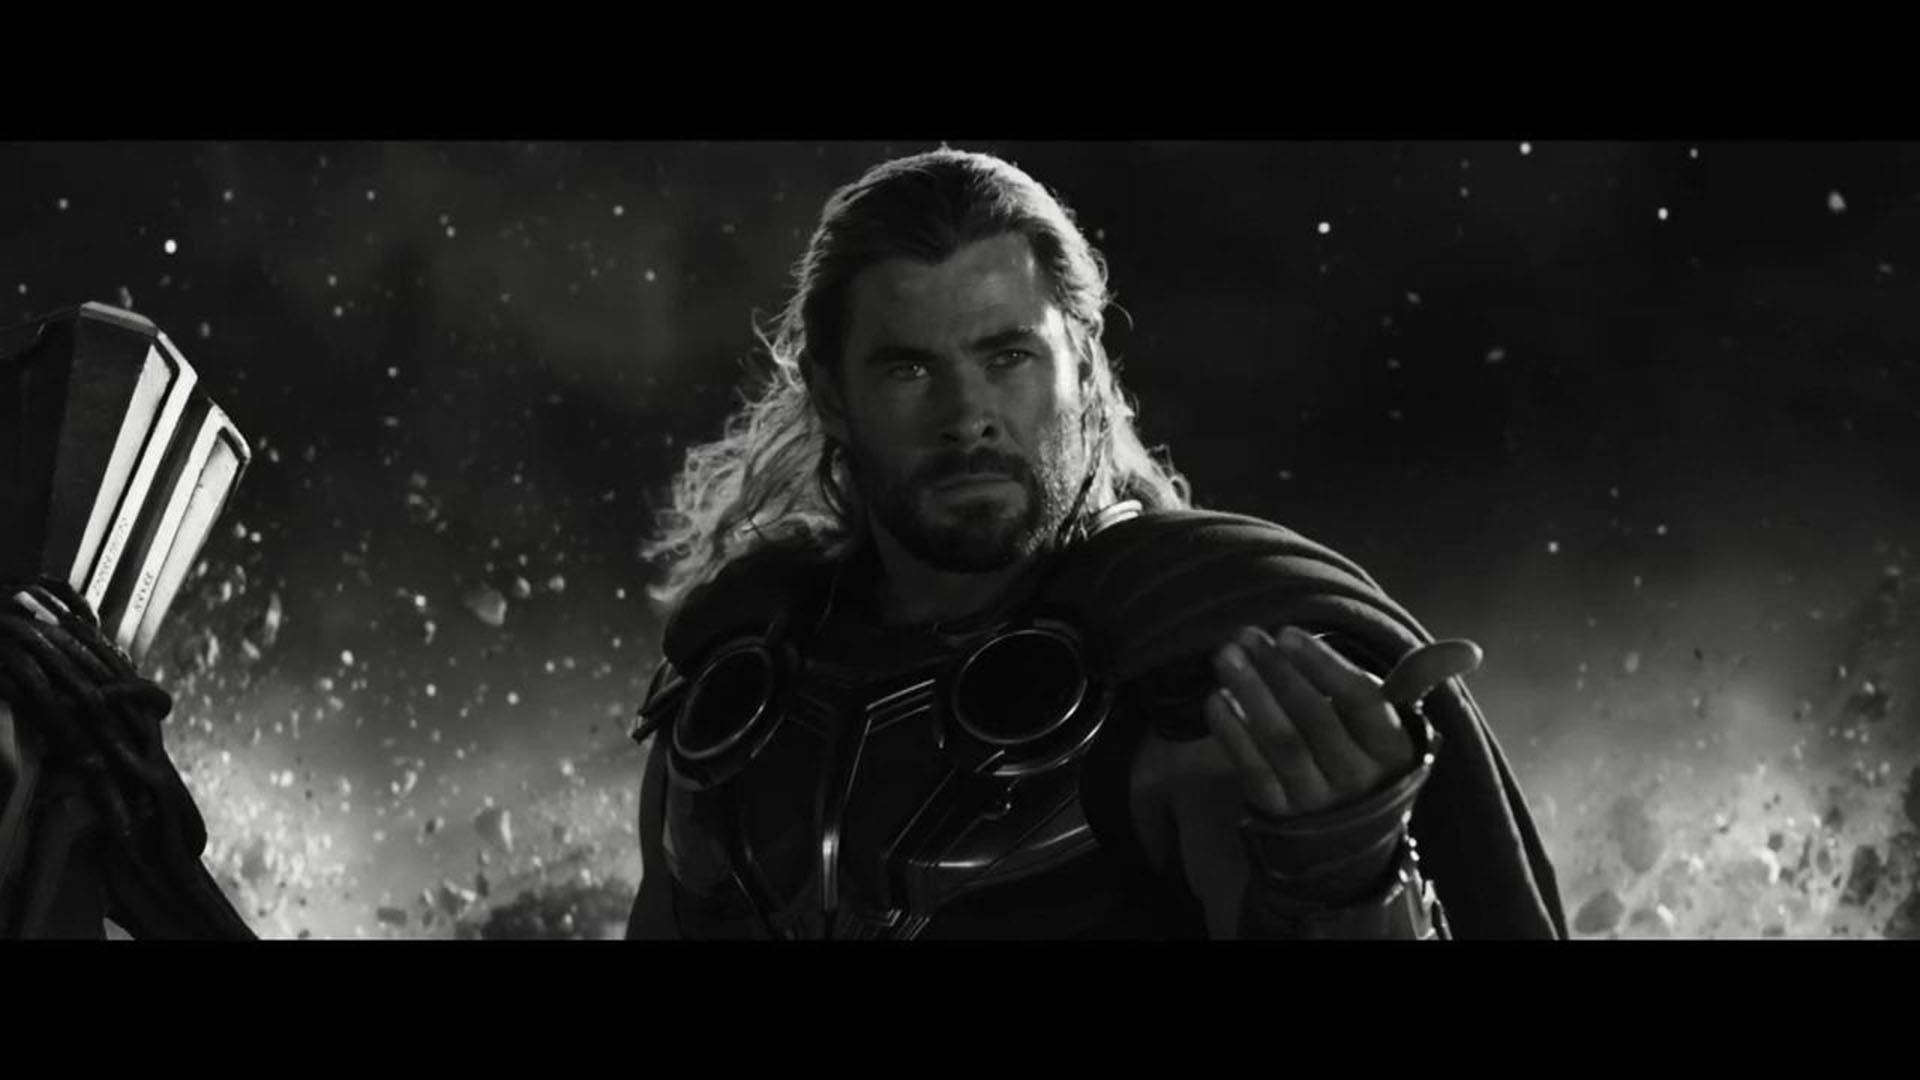 Free Thor Love And Thunder Wallpaper Downloads, [100+] Thor Love And Thunder  Wallpapers for FREE 